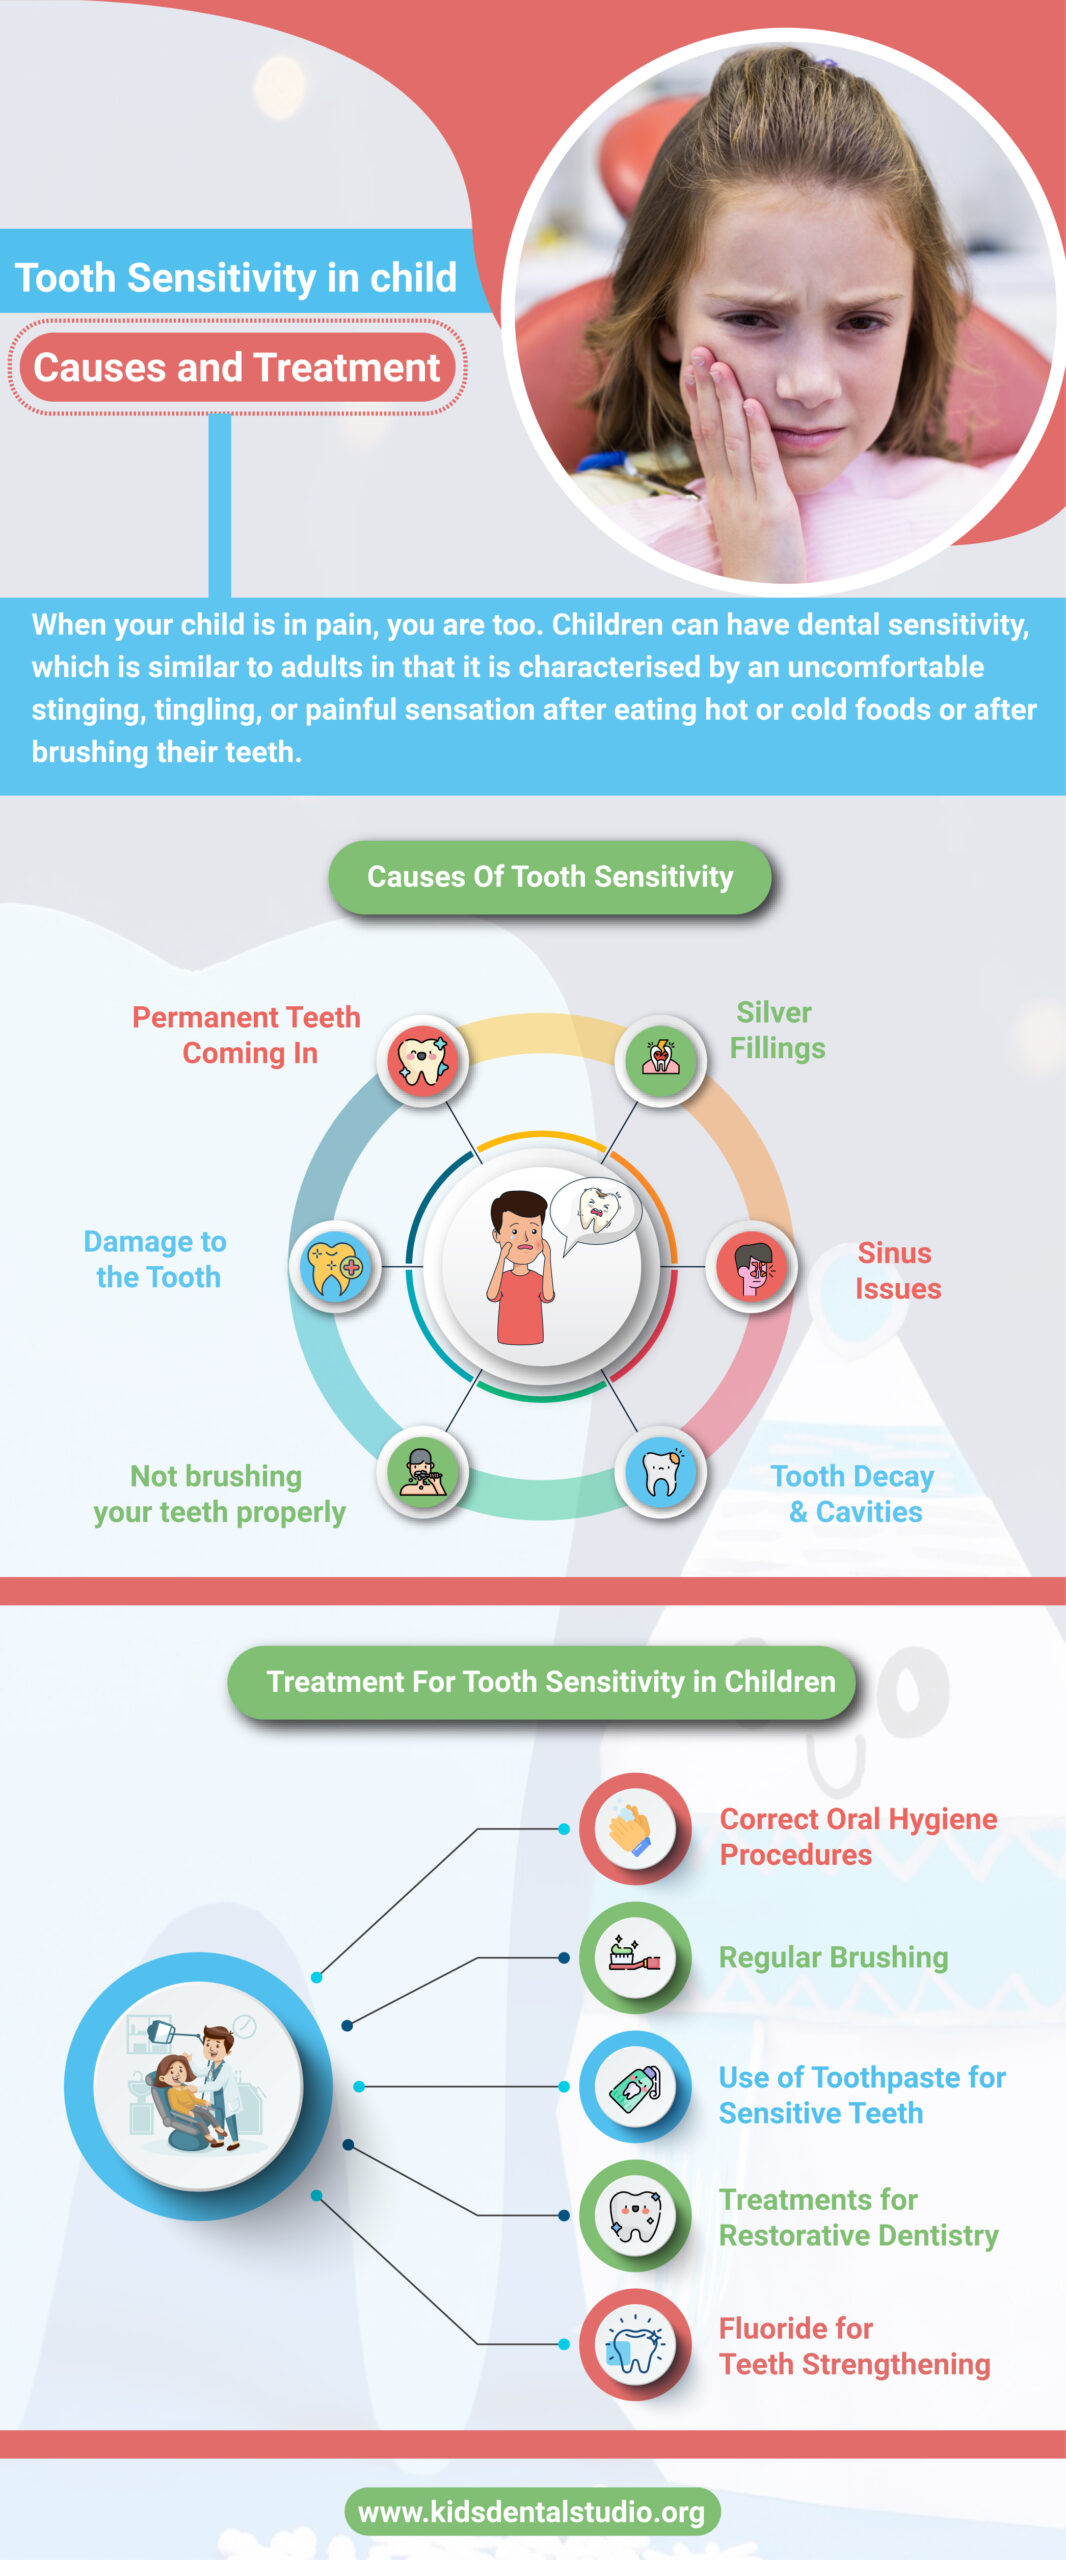 Tooth Sensitivity in Child Causes and Treatment